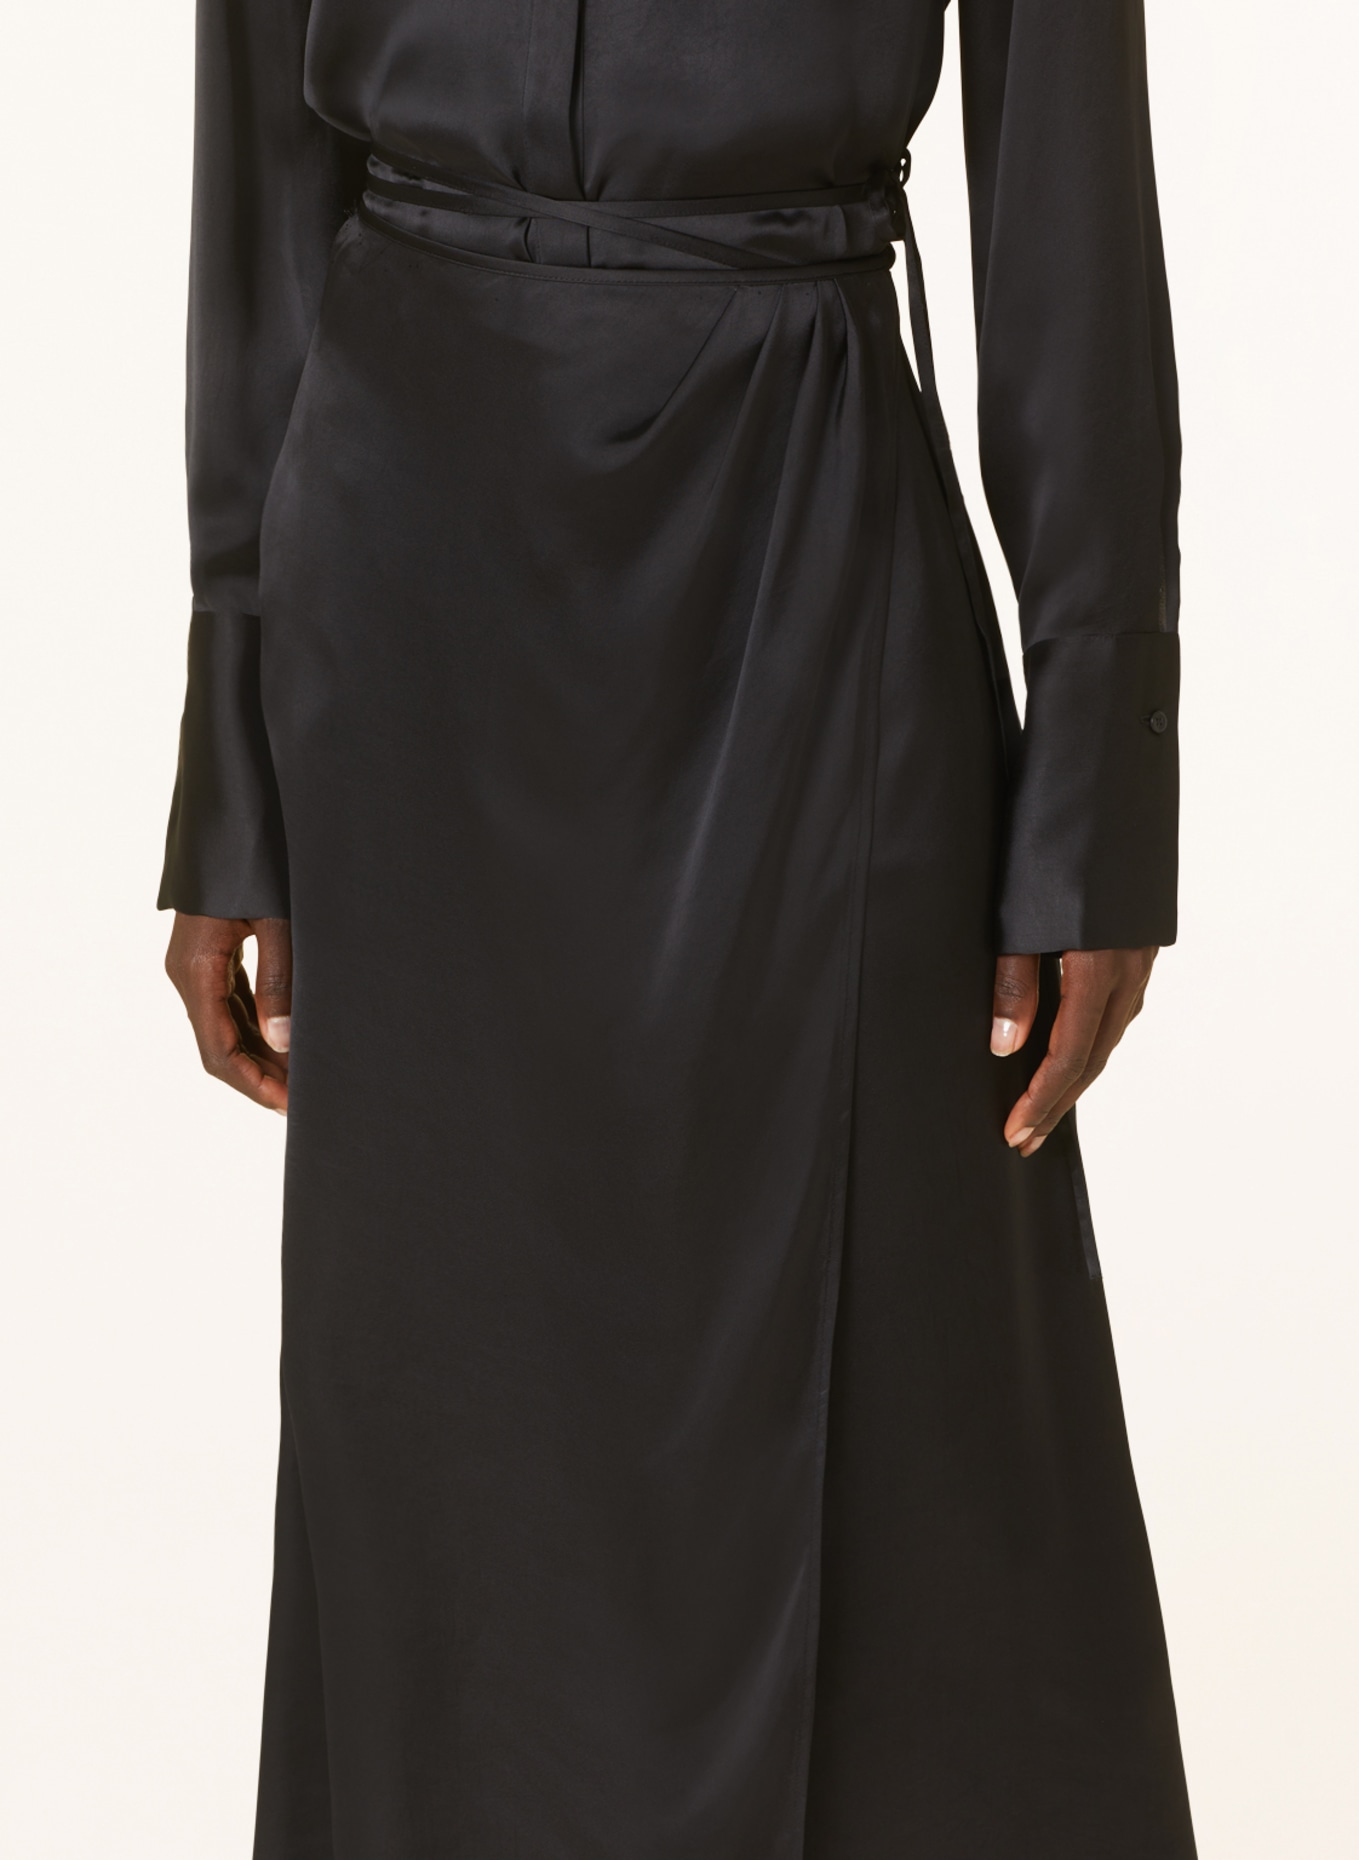 CLOSED Wrap skirt made of satin, Color: BLACK (Image 4)